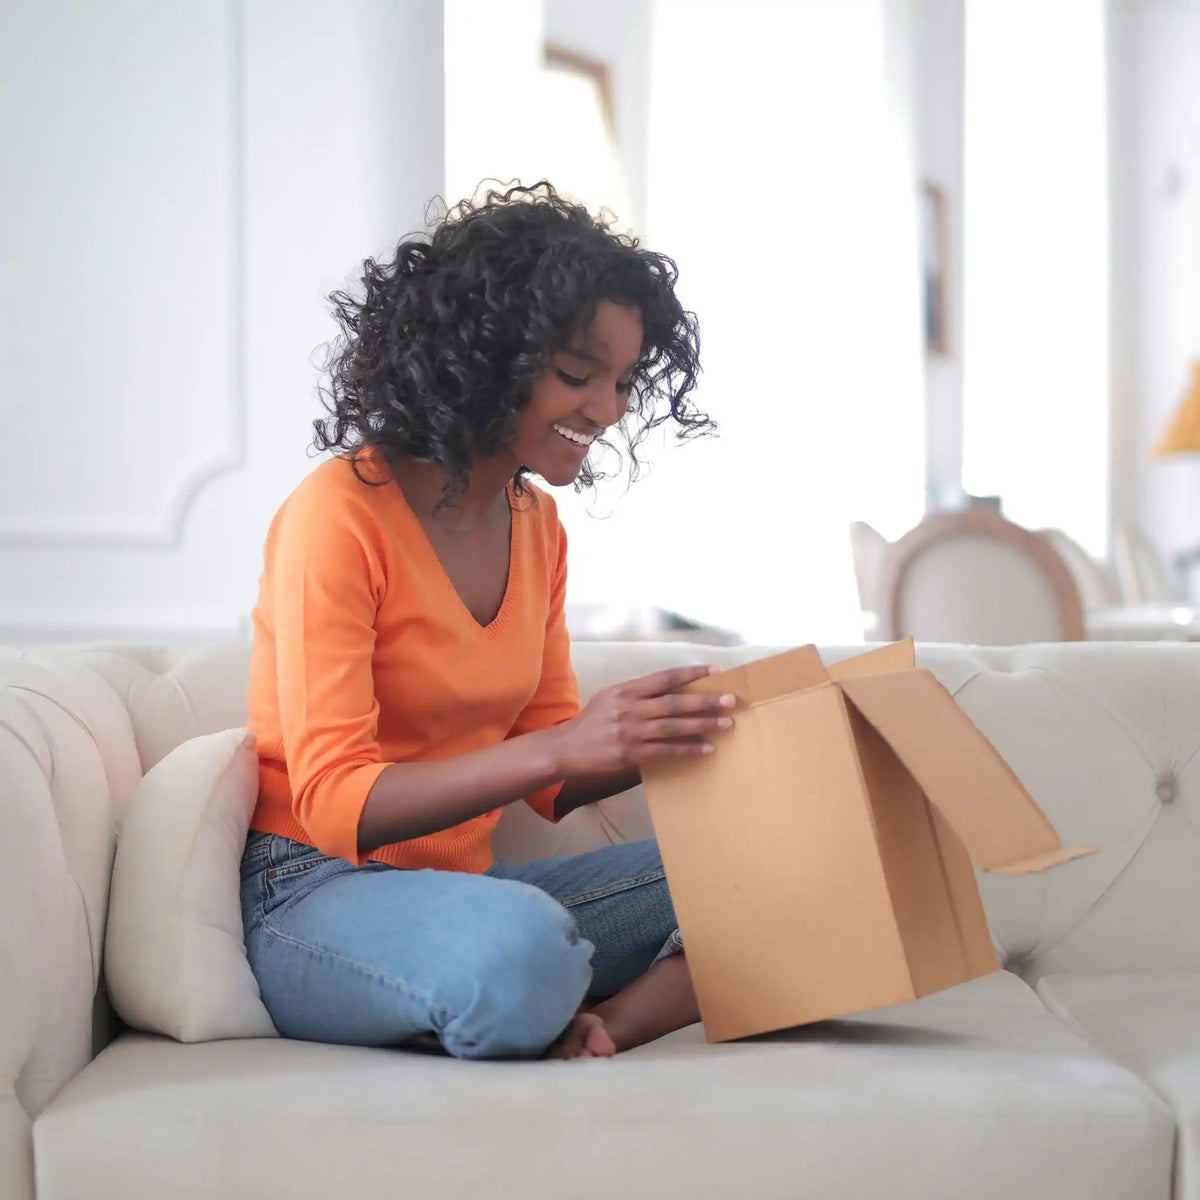 Image of woman sitting on couch opening a cardboard box depicting that Earthlove packaging is recycled, compostable and environmentally friendly.